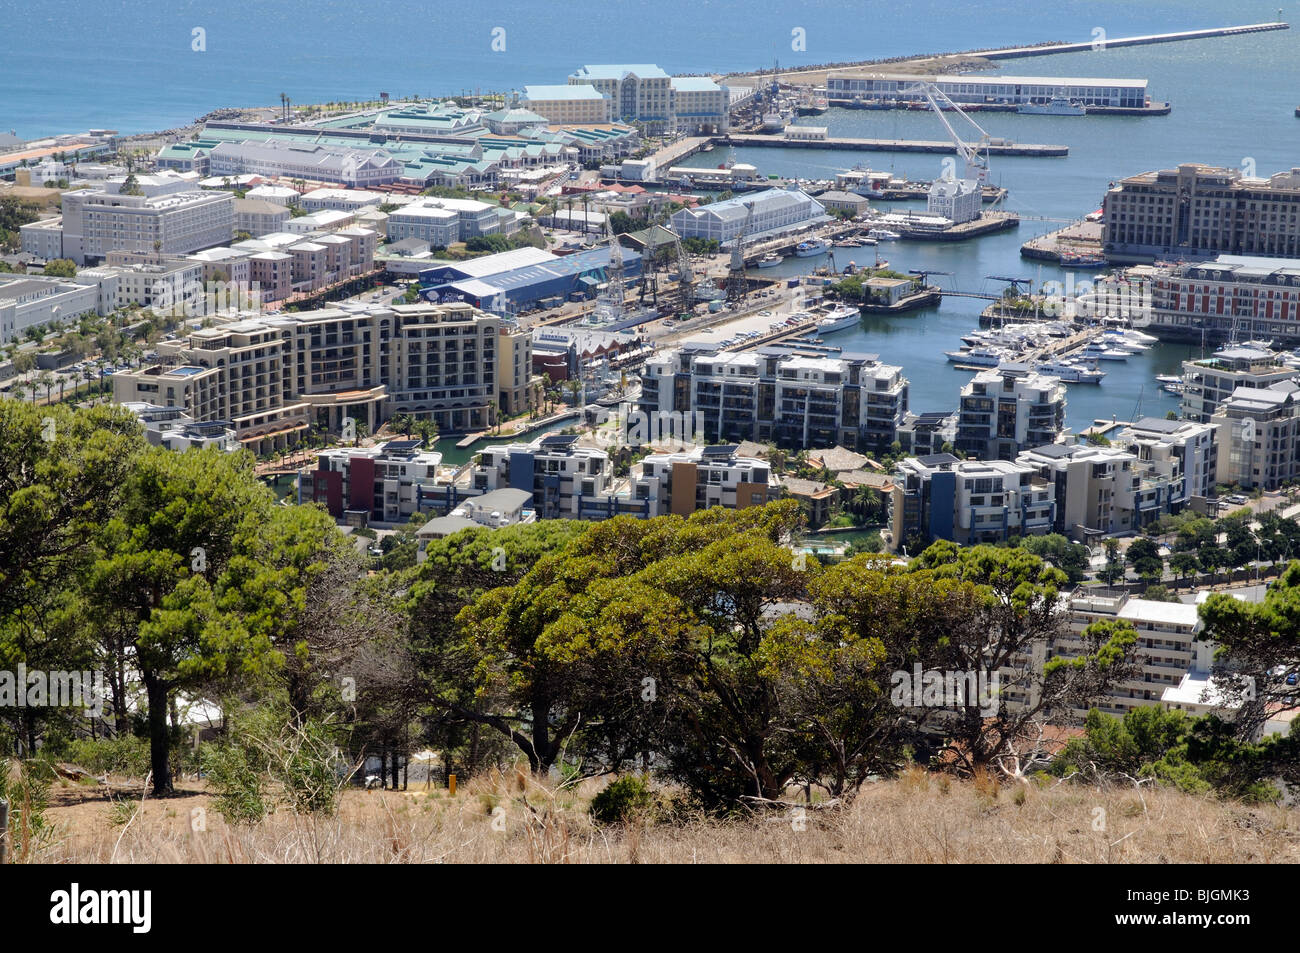 Coastal development of leisure facilities,hotels, waterfront and luxury housing on Table Bay in Cape Town South Africa Stock Photo